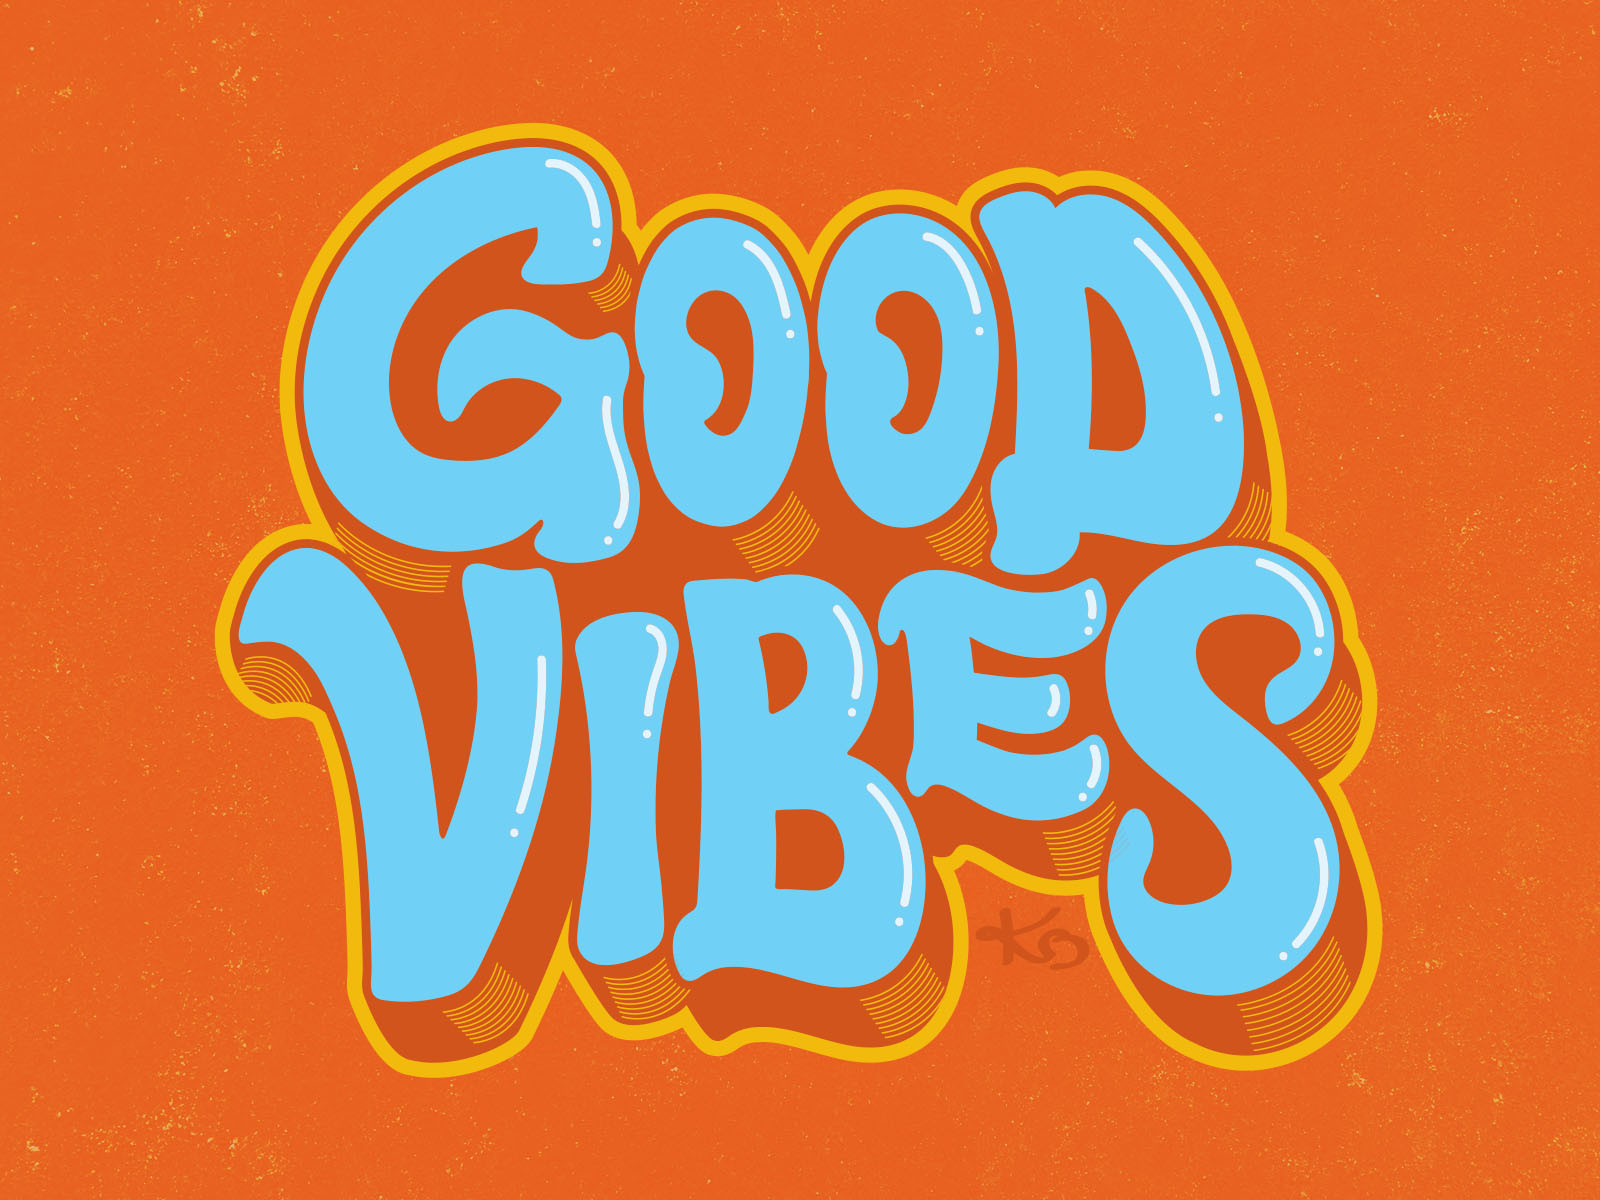 Good Vibes by Kristen Beals on Dribbble